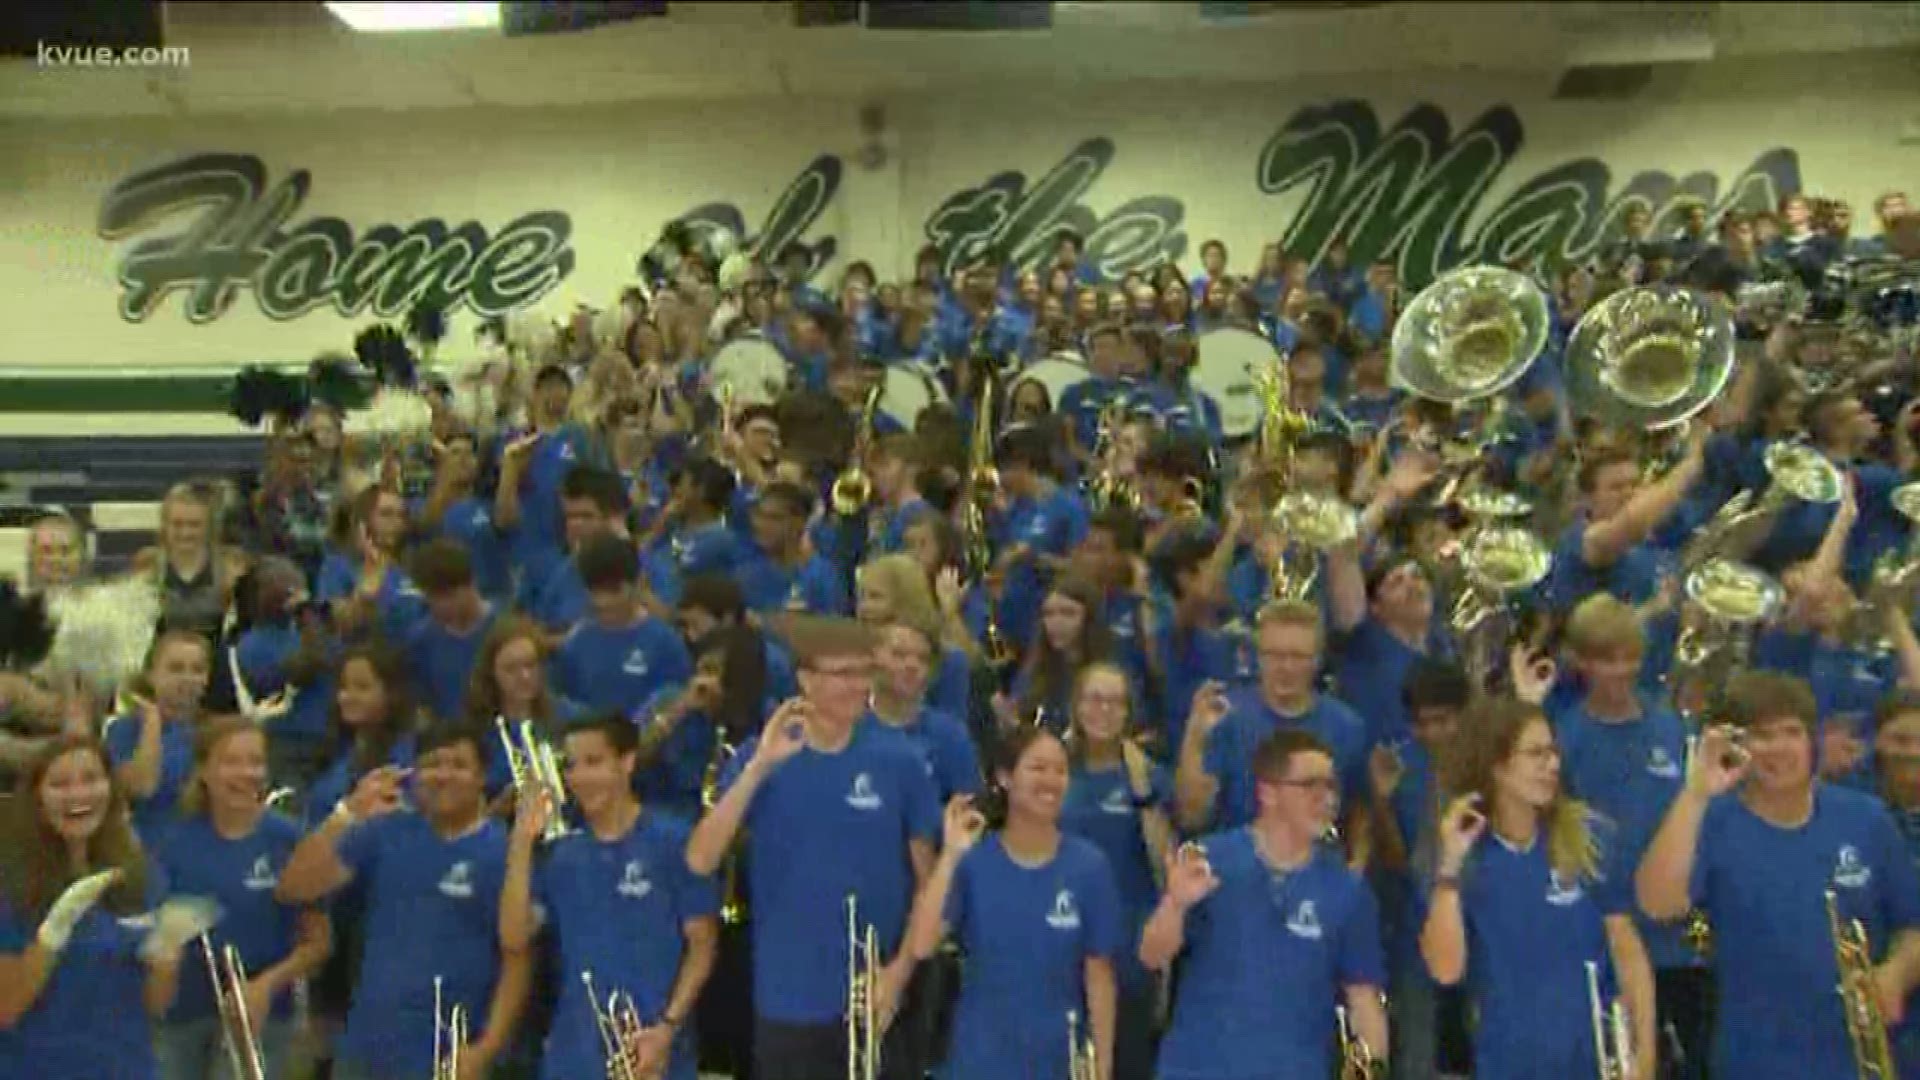 McNeil High School students are celebrating going back to school with KVUE Daybreak's back to school bash.